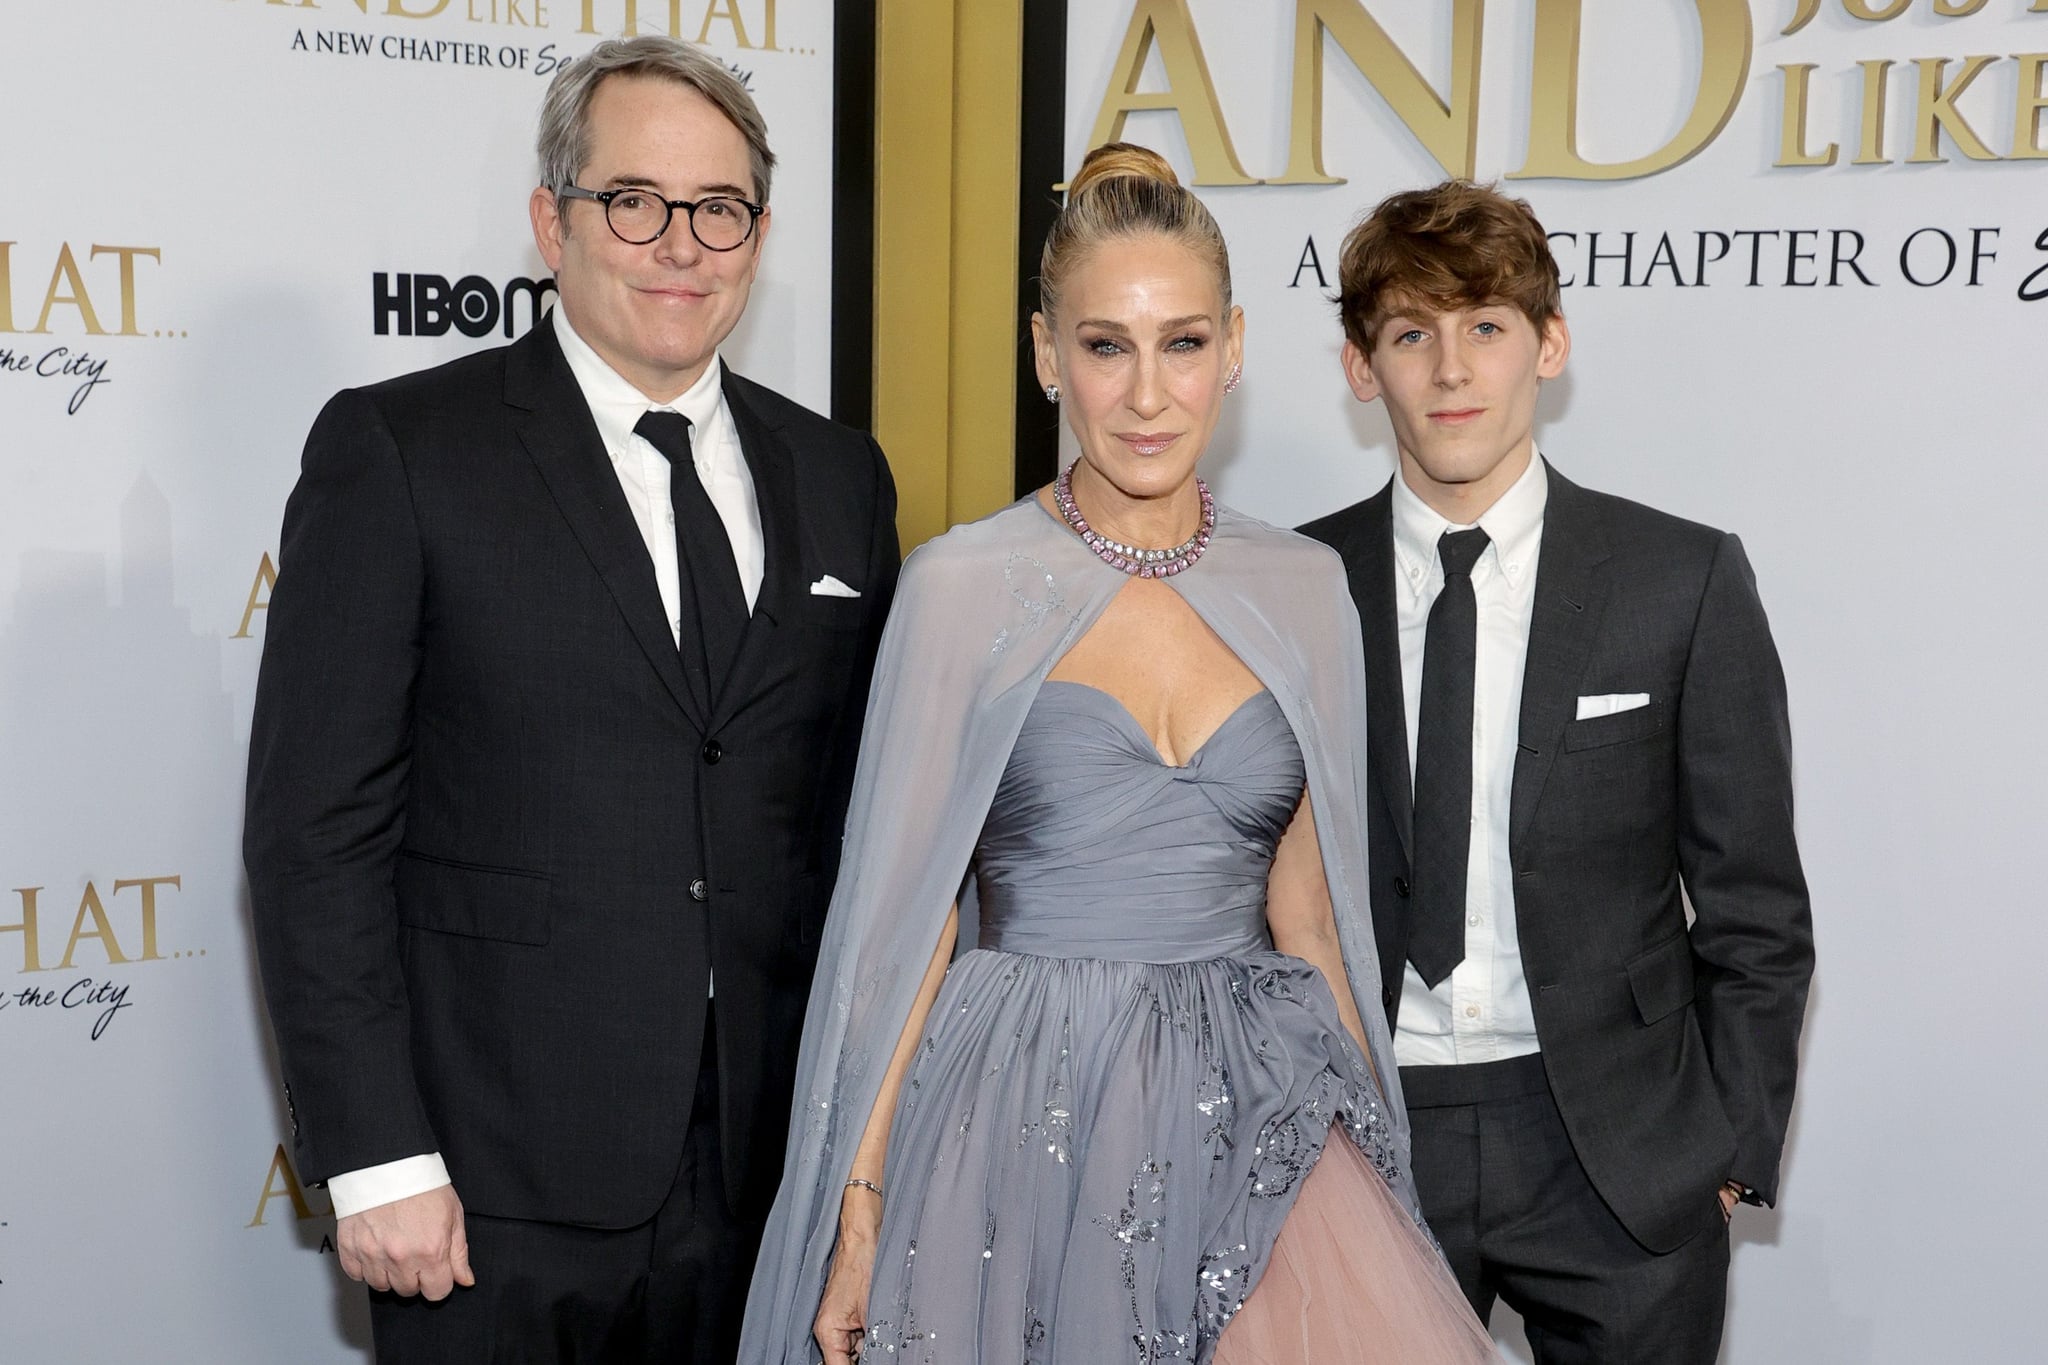 NEW YORK, NEW YORK - DECEMBER 08: (L-R) Matthew Broderick, Sarah Jessica Parker and James Wilkie Broderick attends HBO Max's 